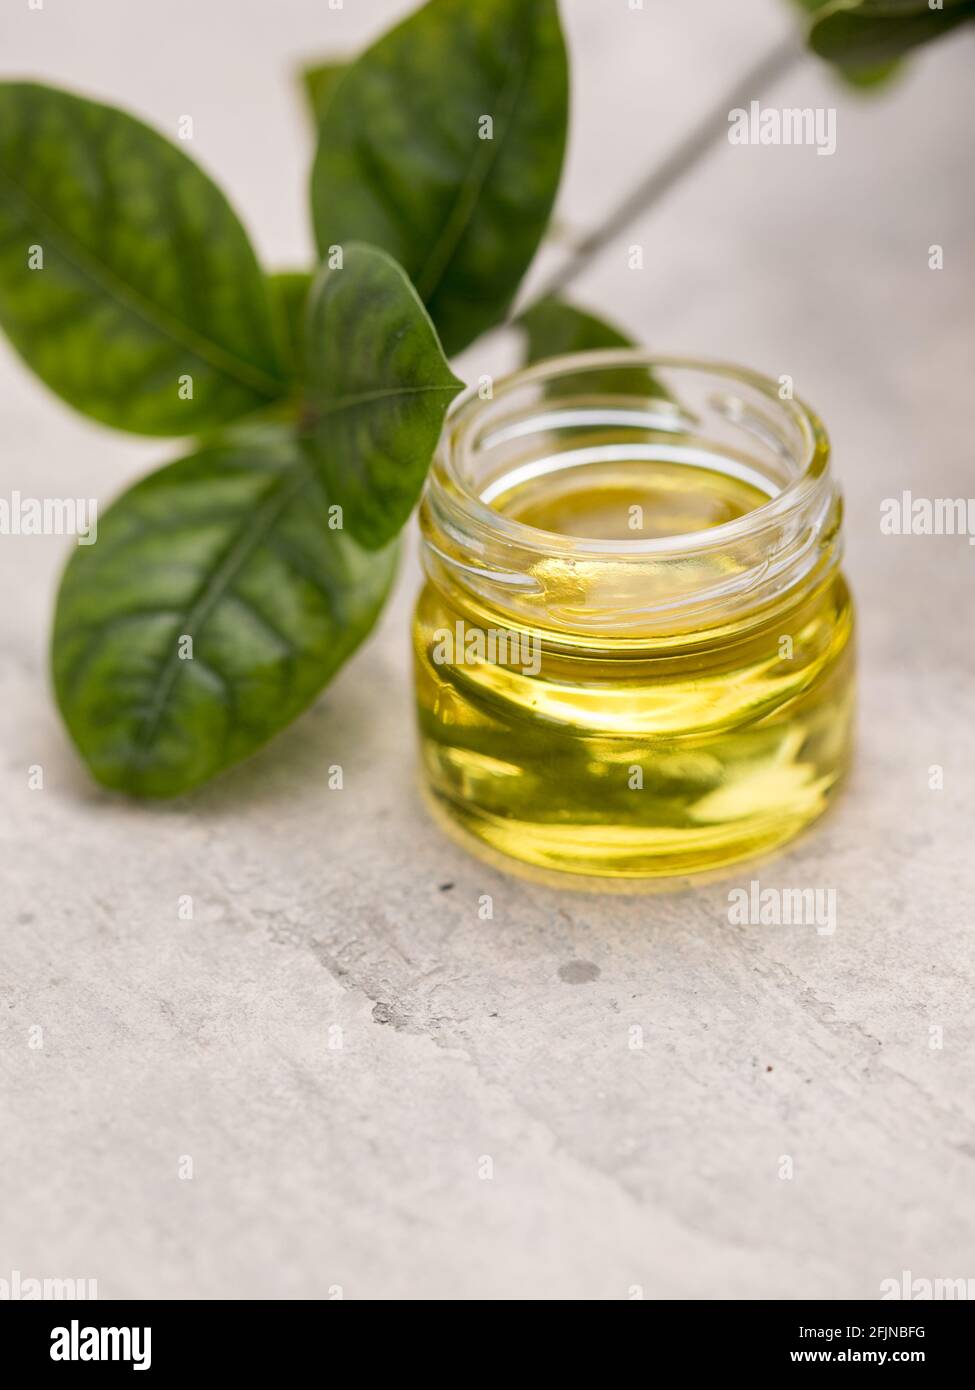 glass bottle of essential bay laurel oil with daphne leaves. Healthy lifestyle spa, therapy concept. Stock Photo